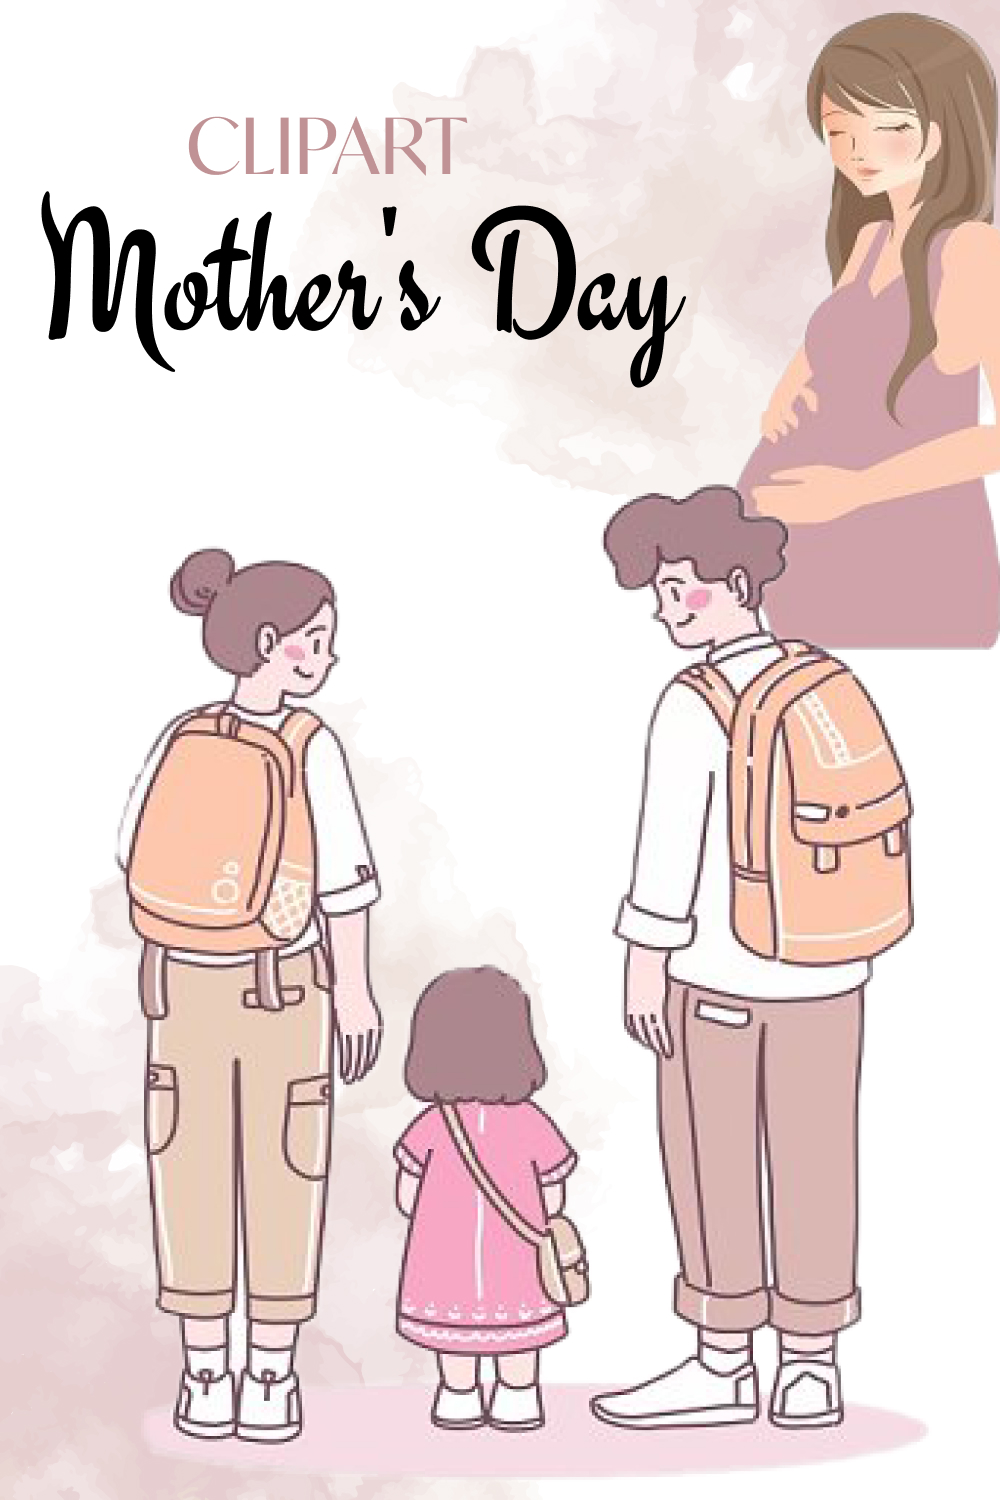 Pinterest of mothers day clipart.